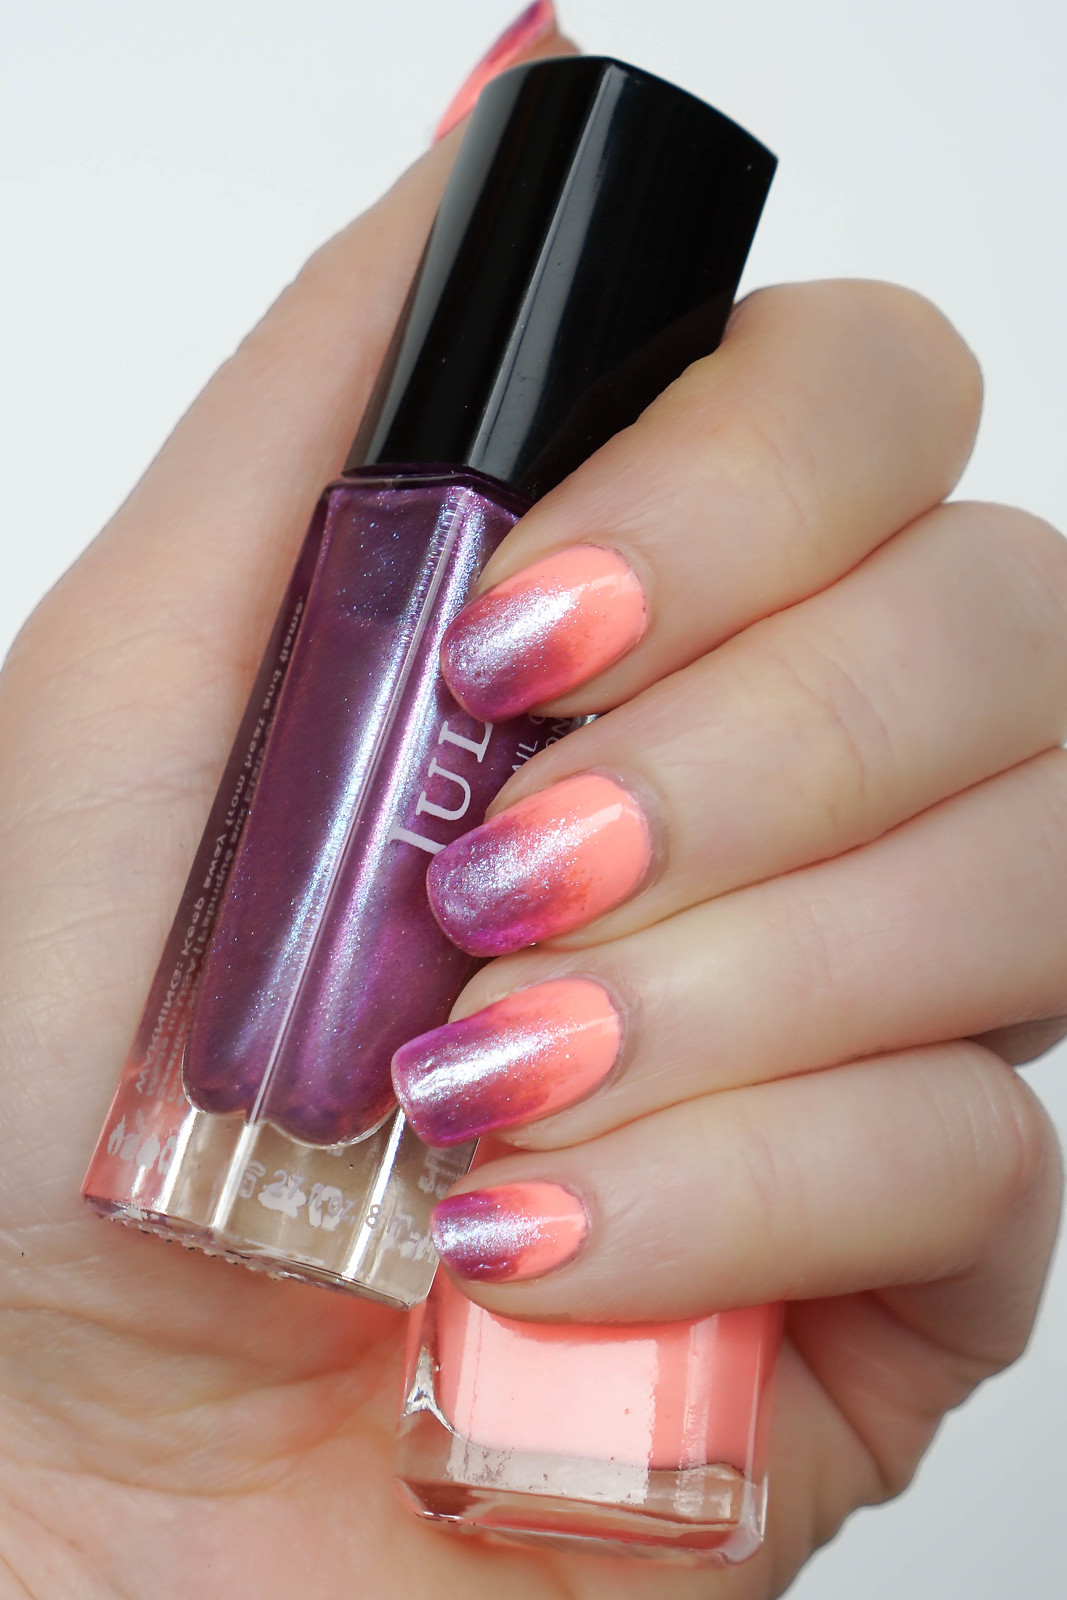 Creamsicle Orange and Iridescent Purple Gradient Manicure RickyColor in Night at the Stalkhouse Julep Nail Polish in Regina